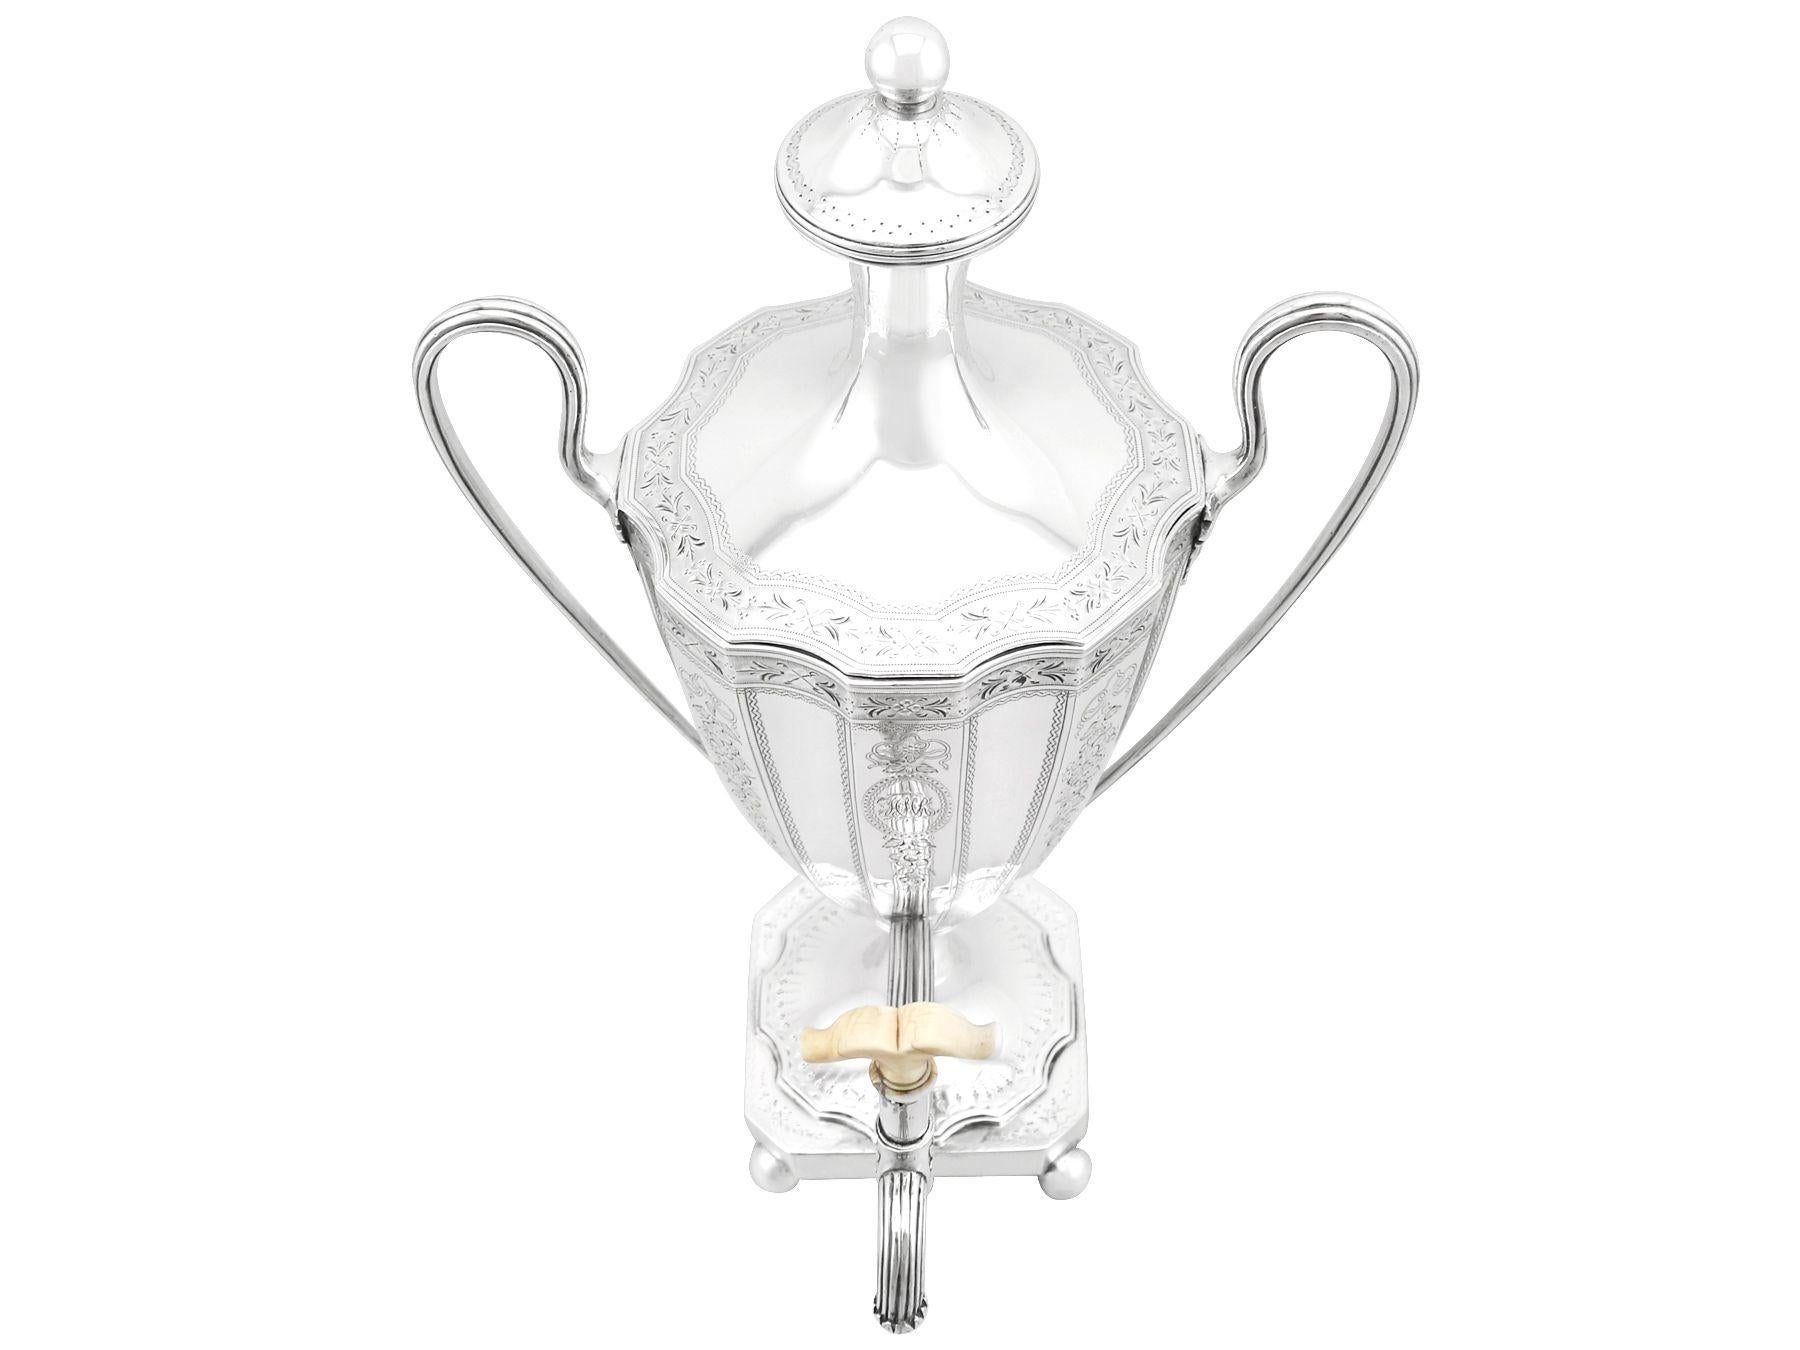 An exceptional, fine and impressive antique George III English sterling silver coffee urn/samovar; an addition to our Georgian silver teaware collection

The alternating concave paneled body of this impressive antique Georgian coffee urn is